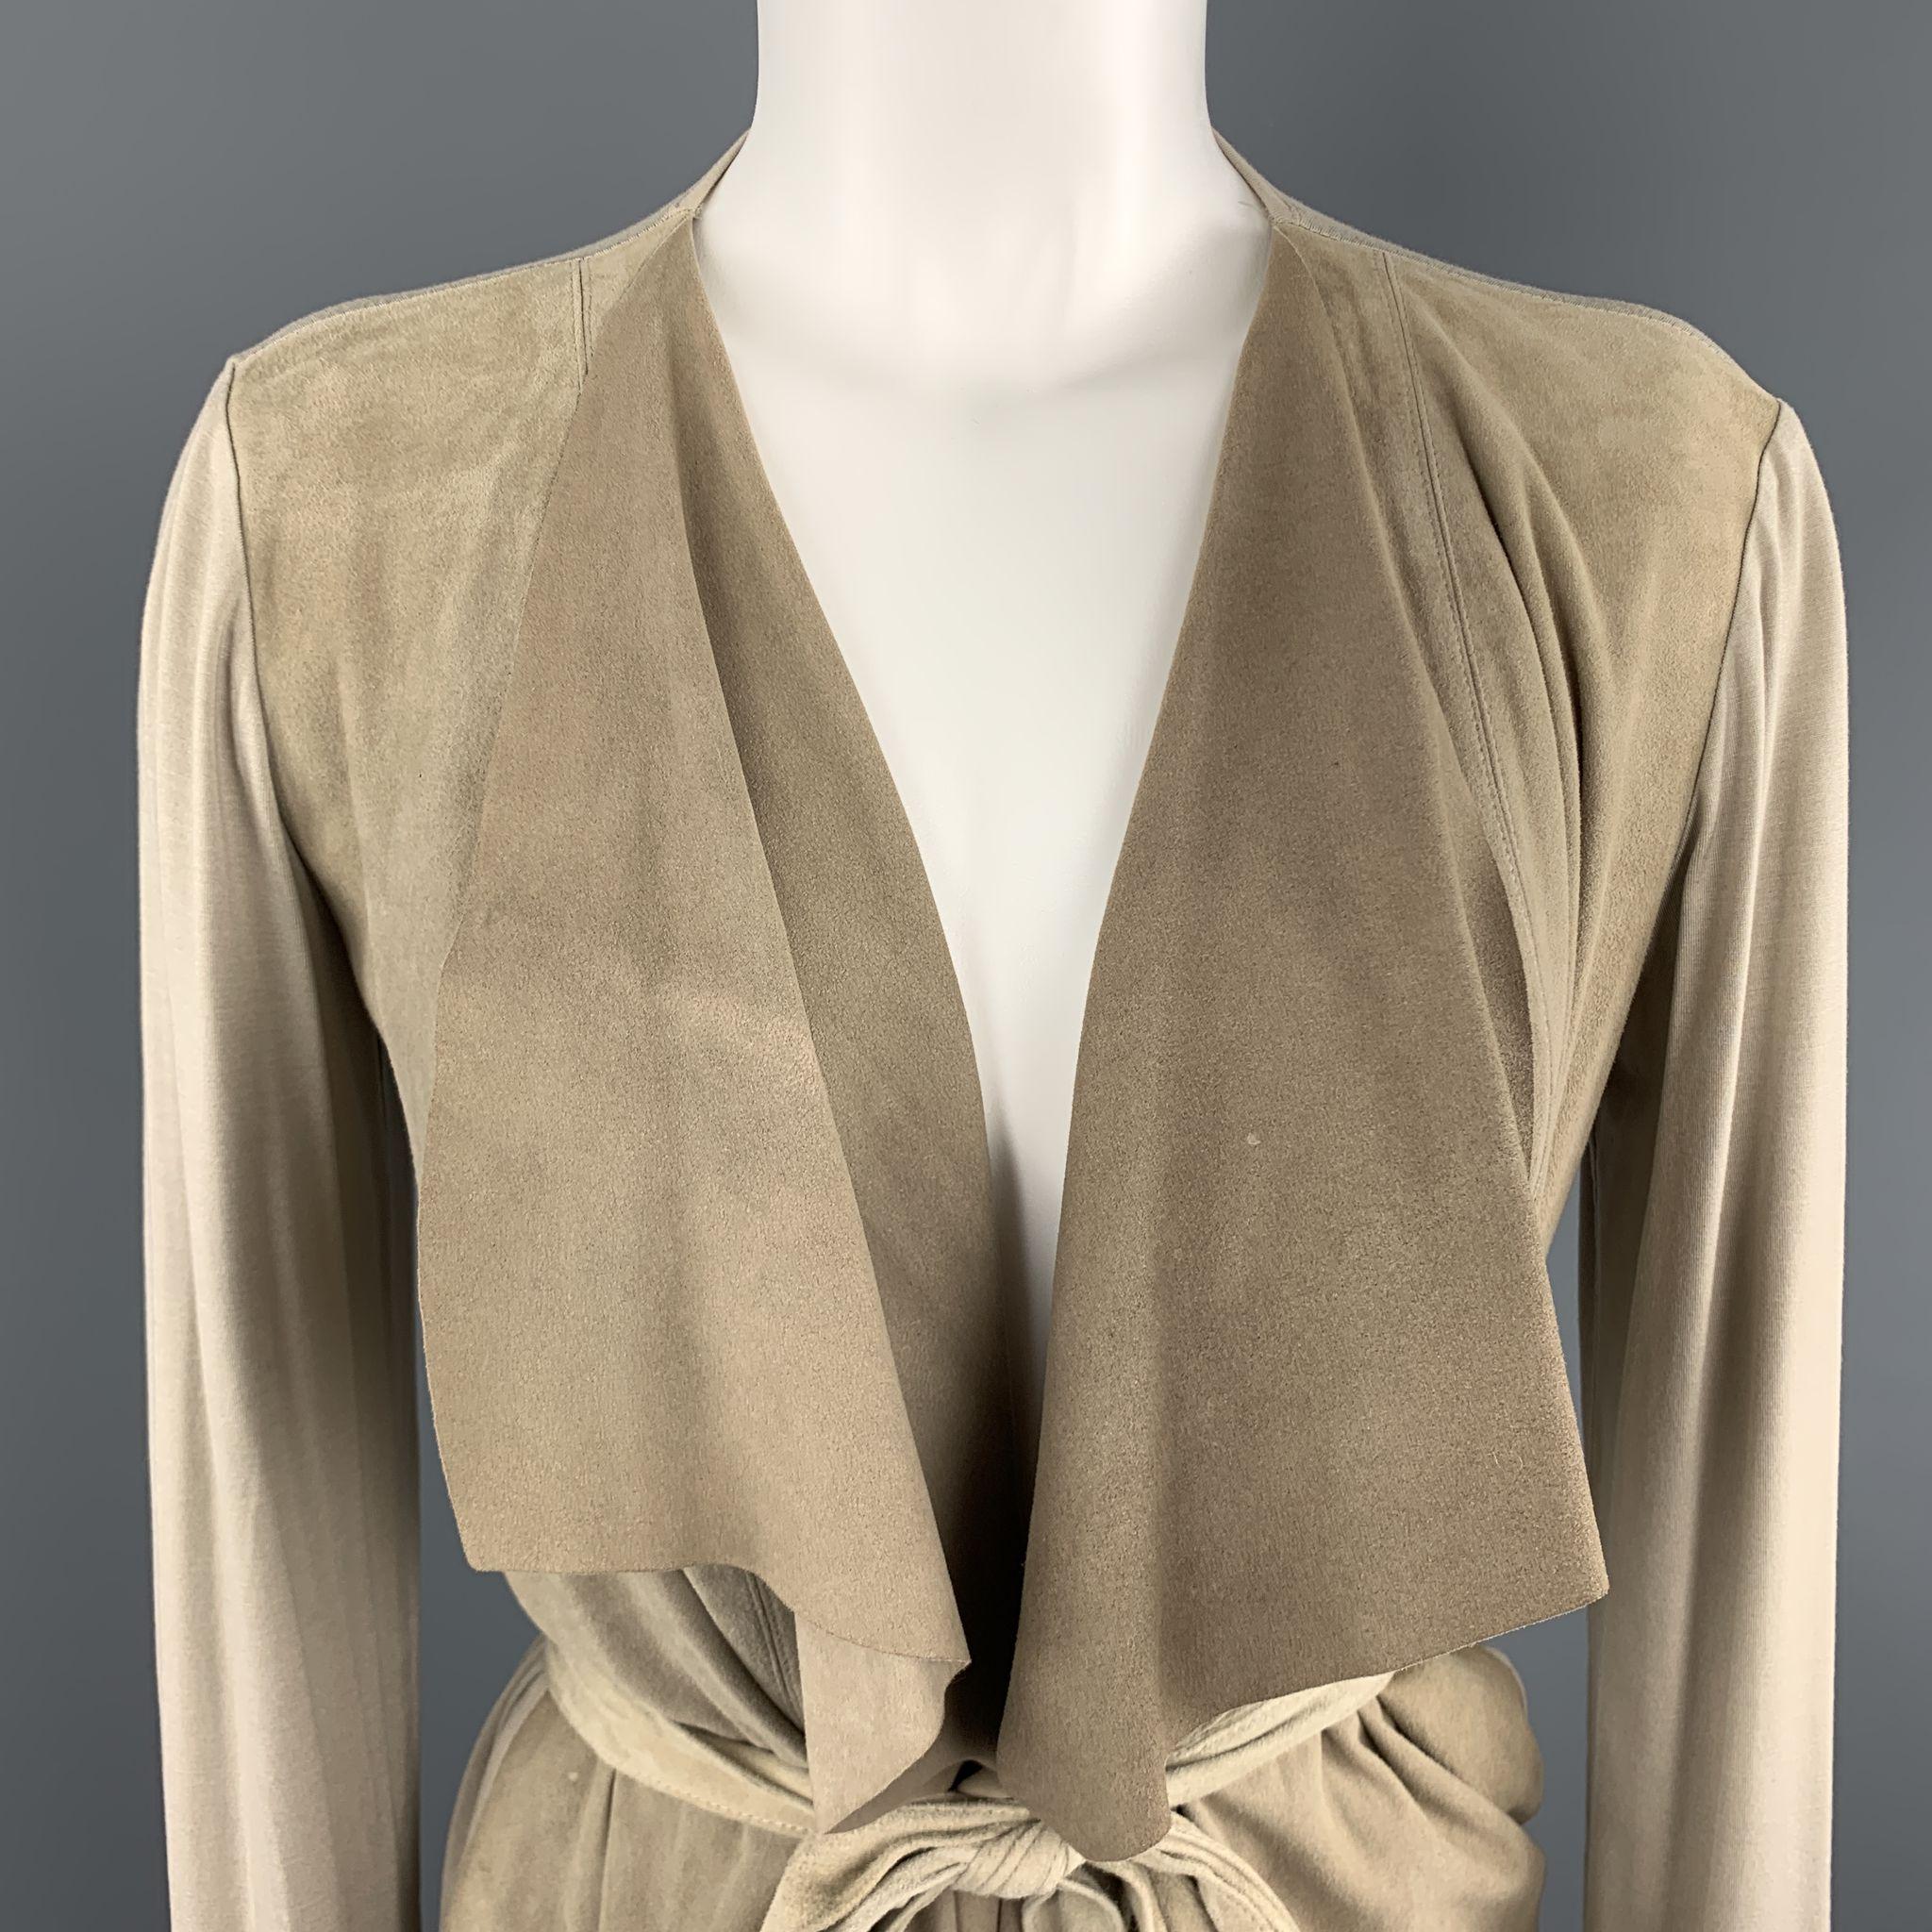 MAX MARA jacket comes in beige viscose jersey with a suede draped collar front and optional belt. Minor wear. Made in Italy.

Good Pre-Owned Condition.
Marked: IT 40

Measurements:

Shoulder: 16 in.
Bust: 36 in.
Sleeve: 25 in.
Length: 23 in.